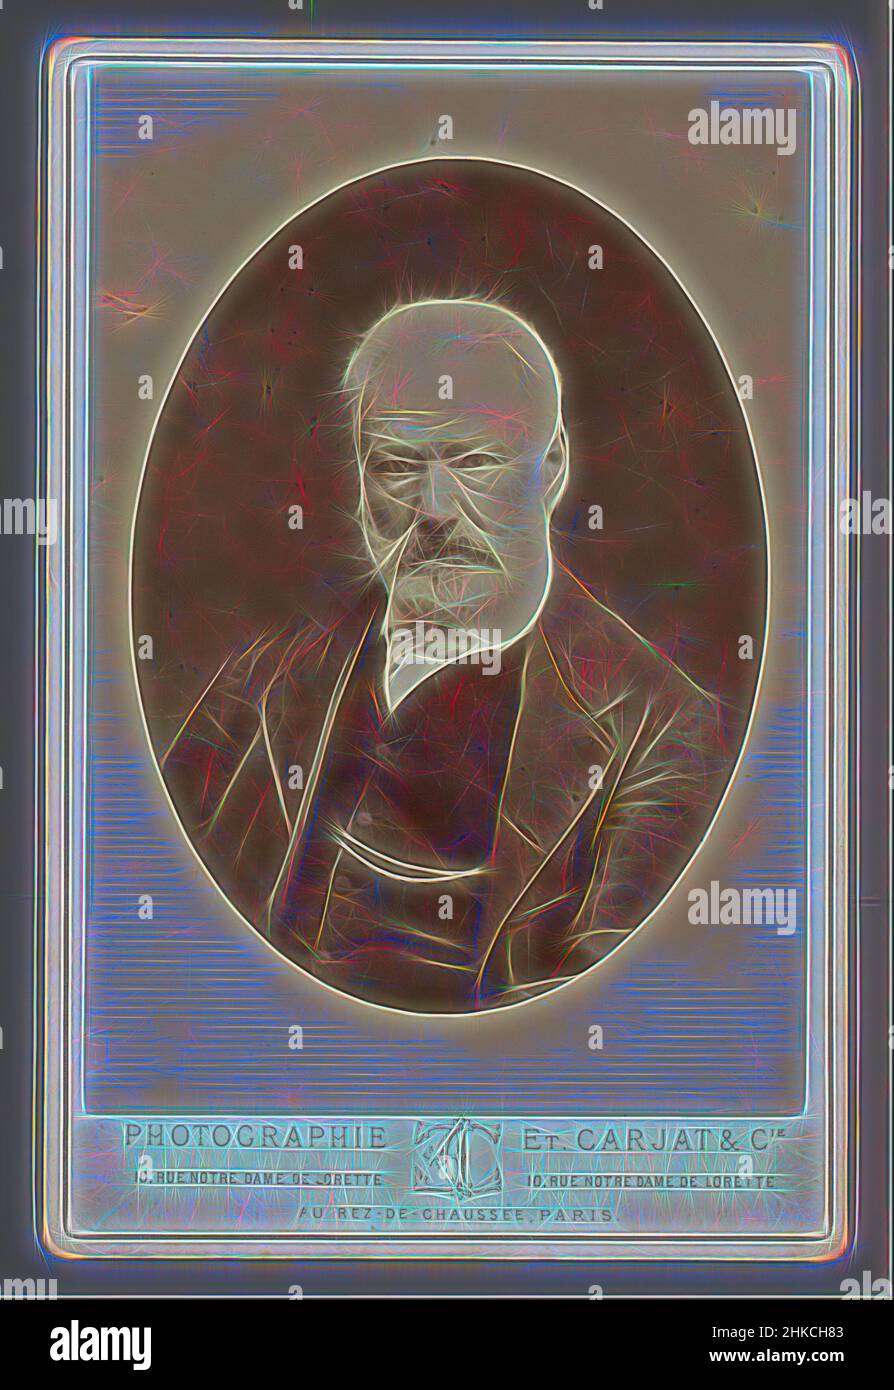 Inspired by Portrait of Victor Hugo, Portrait of the French writer Victor Hugo, Carjat et Cie., Paris, c. 1870 - c. 1890, paper, albumen print, height 140 mm × width 96 mmheight 163 mm × width 107 mm, Reimagined by Artotop. Classic art reinvented with a modern twist. Design of warm cheerful glowing of brightness and light ray radiance. Photography inspired by surrealism and futurism, embracing dynamic energy of modern technology, movement, speed and revolutionize culture Stock Photo